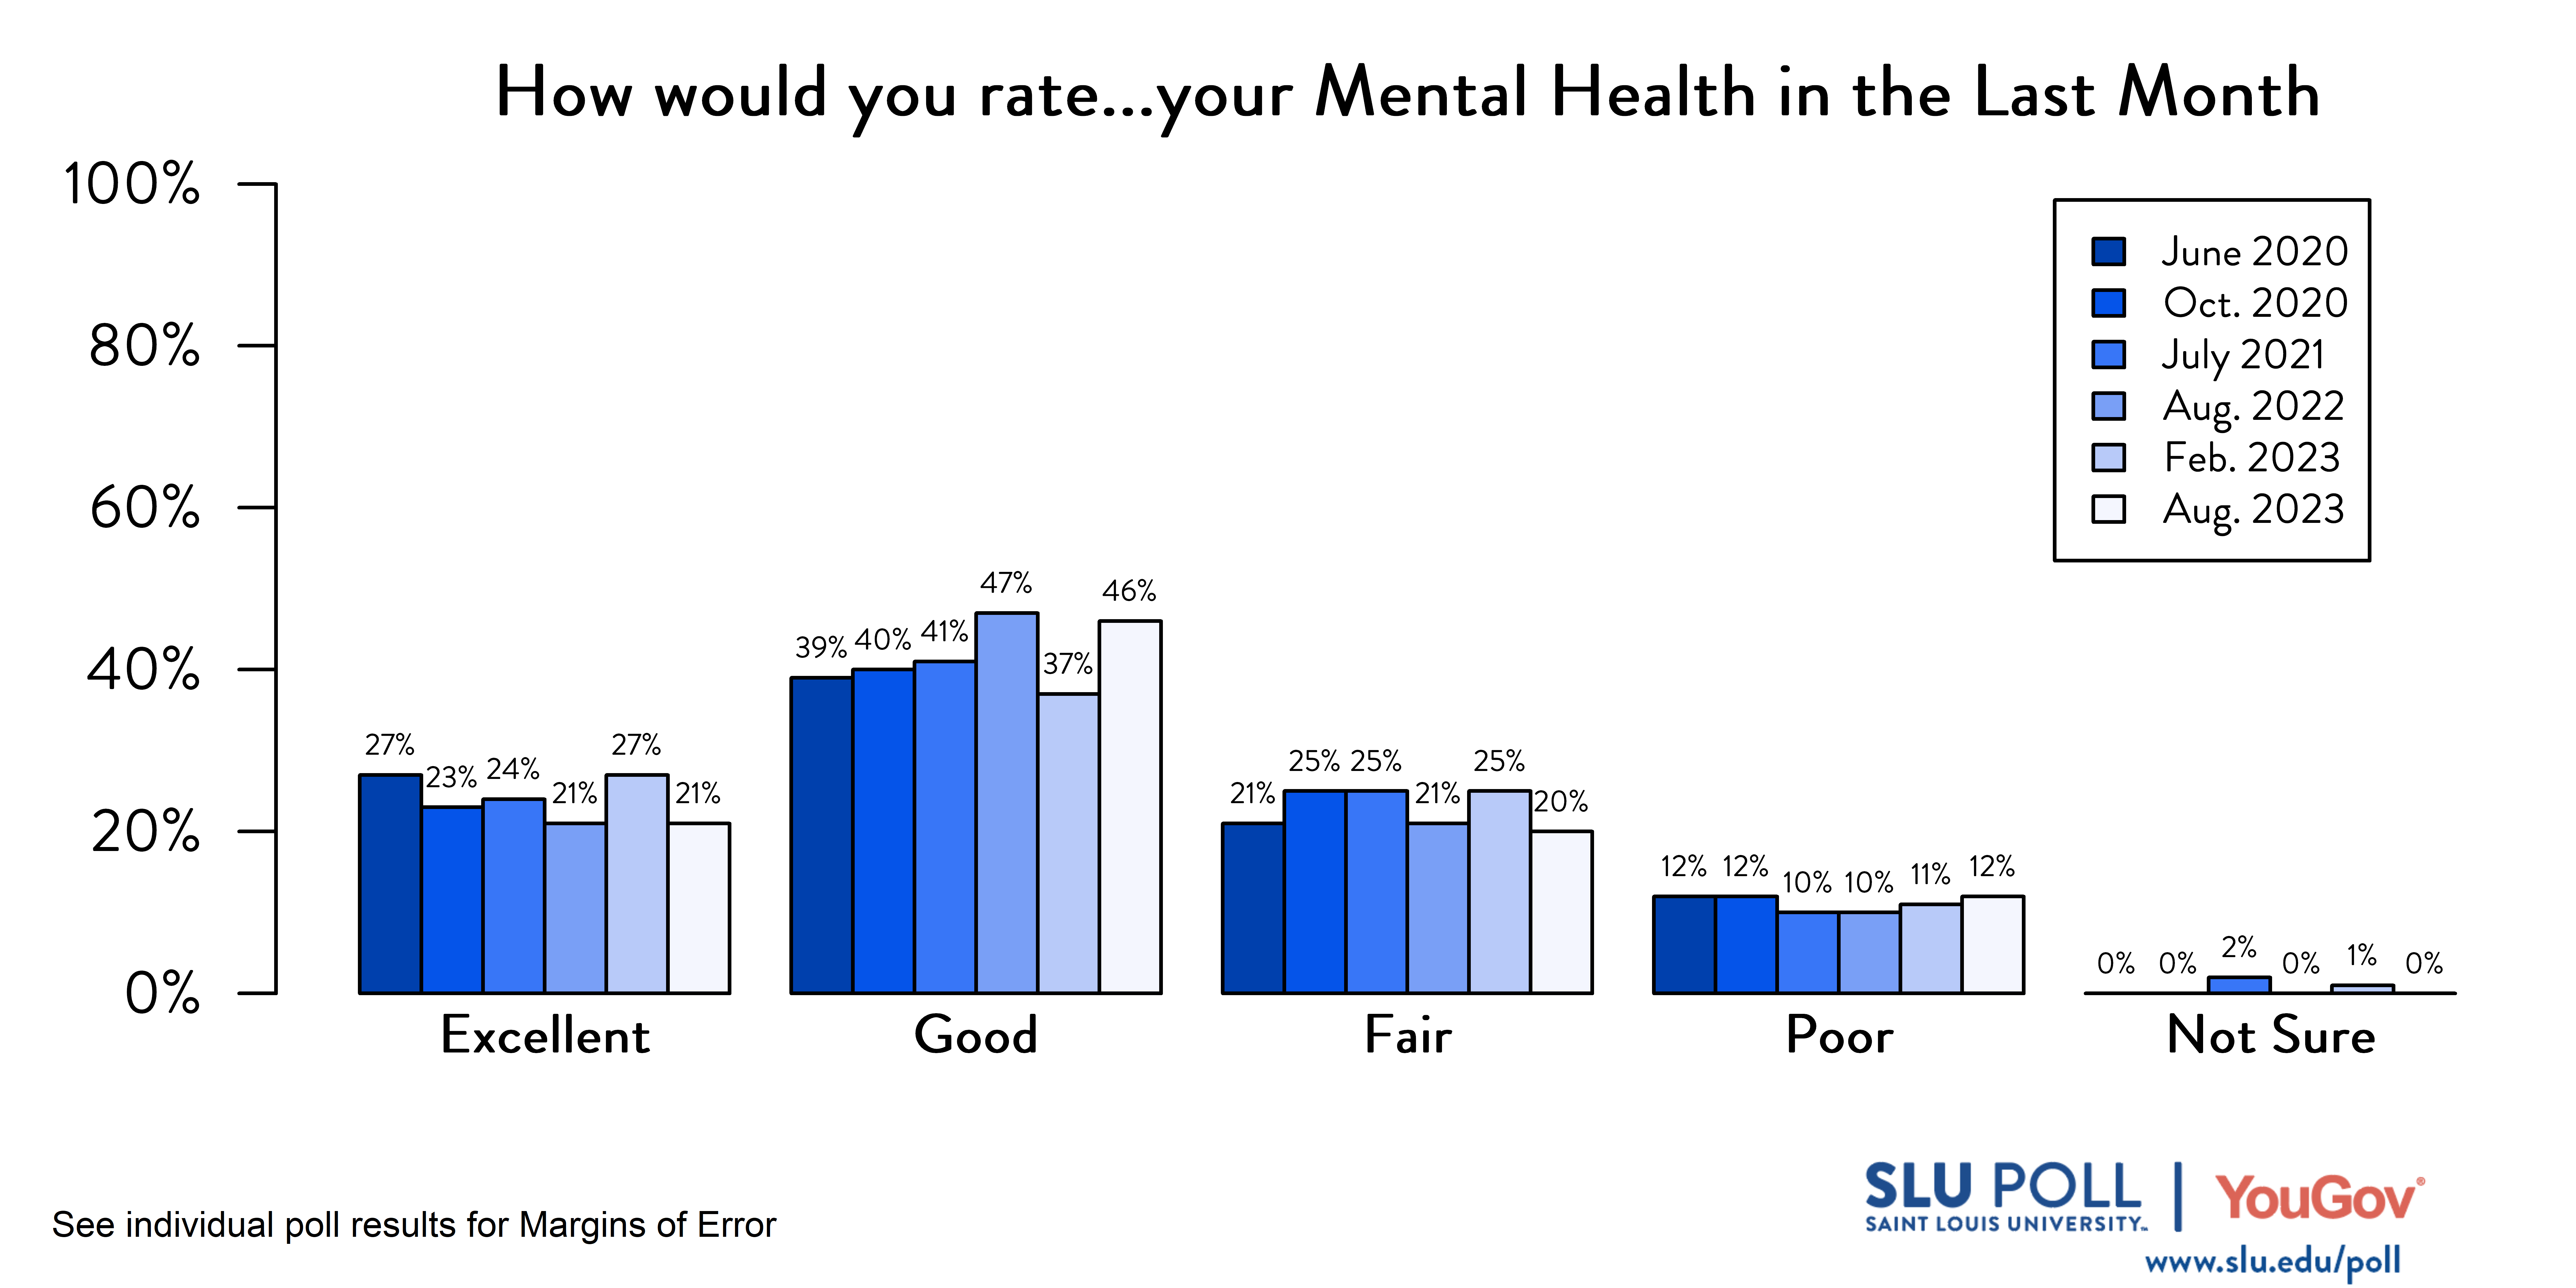 Likely voters' responses to 'How would you rate the condition of the following: Your mental health in the last month?'. June 2020 Voter Responses 27% Excellent, 39% Good, 21% Fair, 12% Poor, and 0% Not sure. October 2020 Voter Responses: 23% Excellent, 40% Good, 25% Fair, 12% Poor, and 0% Not sure. July 2021 Voter Responses: 24% Excellent, 41% Good, 25% Fair, 10% Poor, and 2% Not sure. August 2022 Voter Responses: 21% Excellent, 47% Good, 21% Fair, 10% Poor, and 0% Not sure. February 2023 Voter Responses: 27% Excellent, 37% Good, 25% Fair, 11% Poor, and 1% Not sure. August 2023 Voter Responses: 21% Excellent, 46% Good, 20% Fair, 12% Poor, and 0% Not sure.